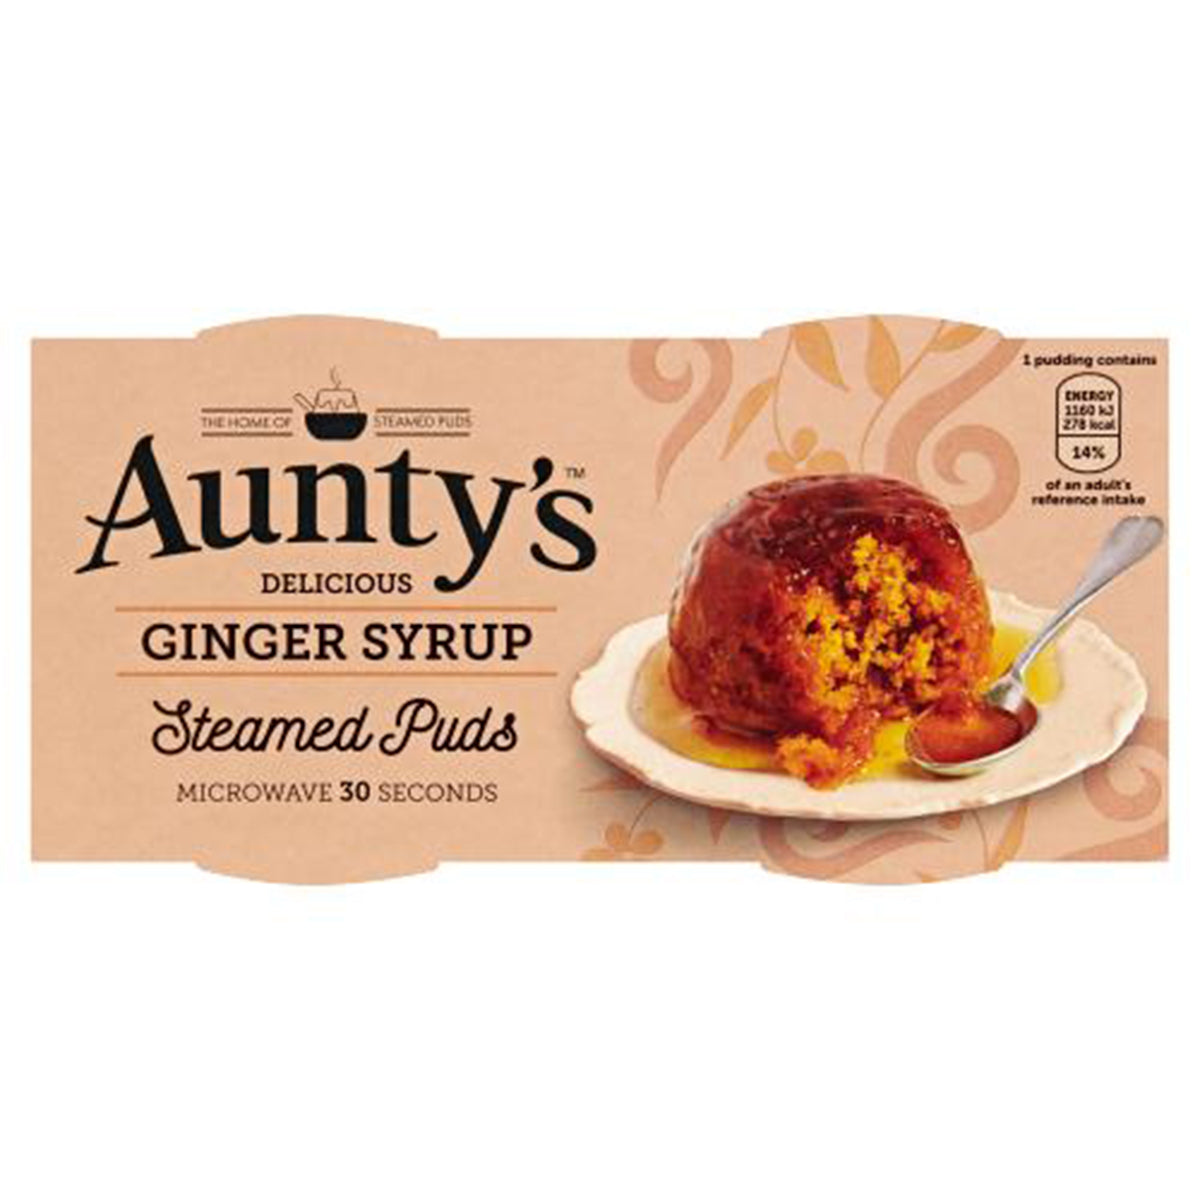 Auntys - Ginger Syrup Puddings - 2x95g - Continental Food Store